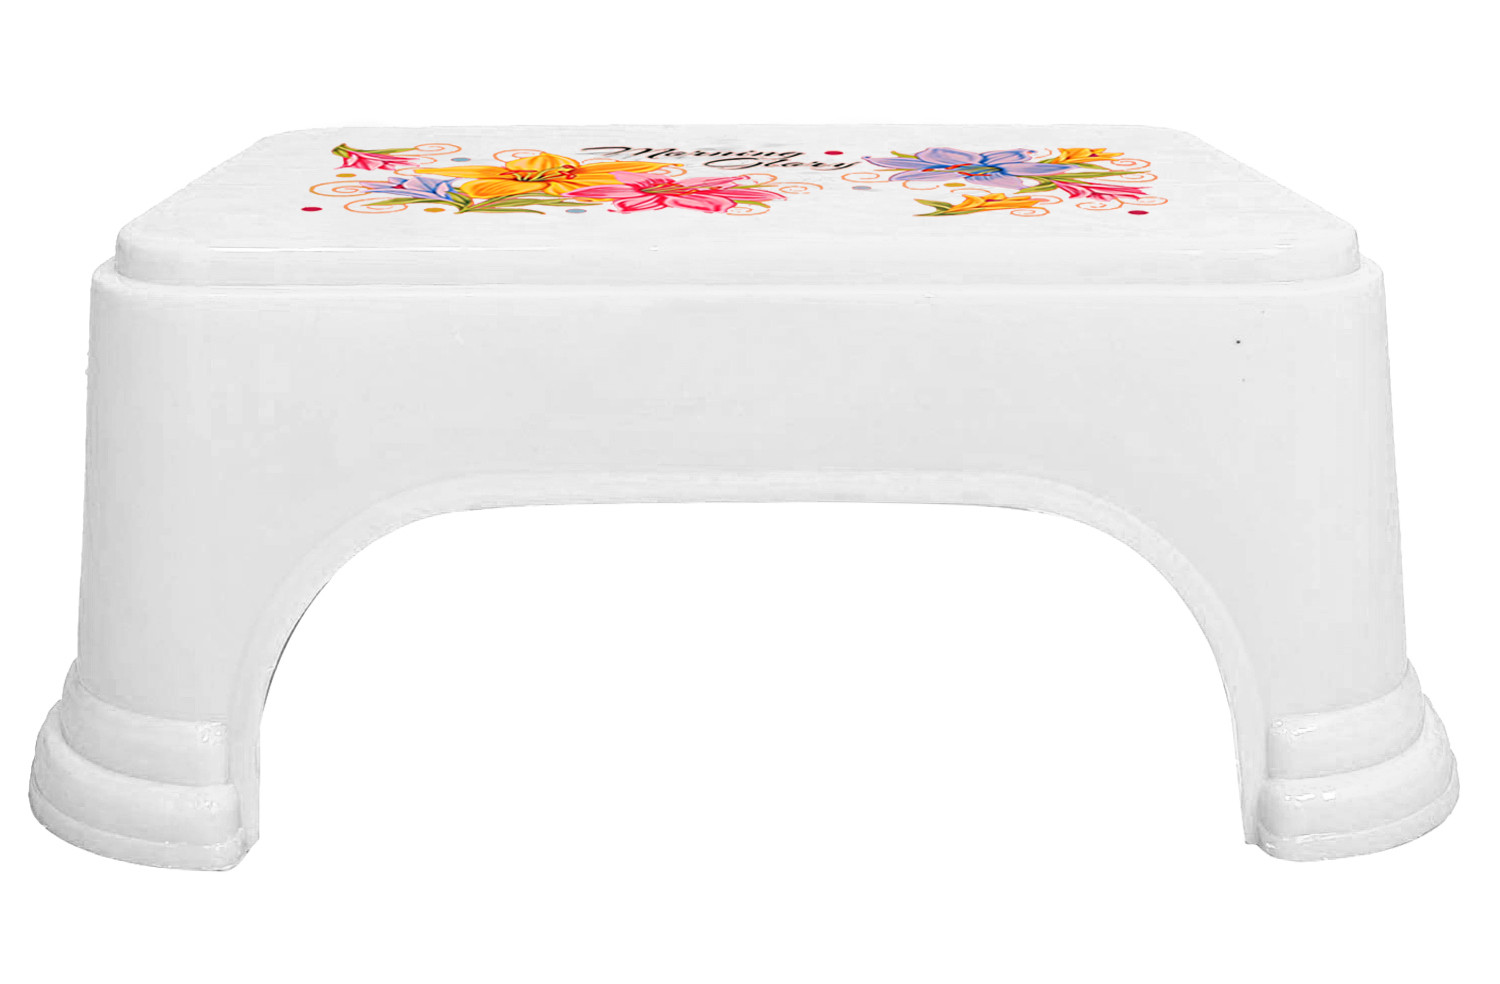 Kuber Industries Floral Print 3 Pieces Plastic Bathroom Stool, Adults Simple Style Stool Anti-Slip with Strong Bearing Stool for Home, Office, Kindergarten, Pink,Blue & White